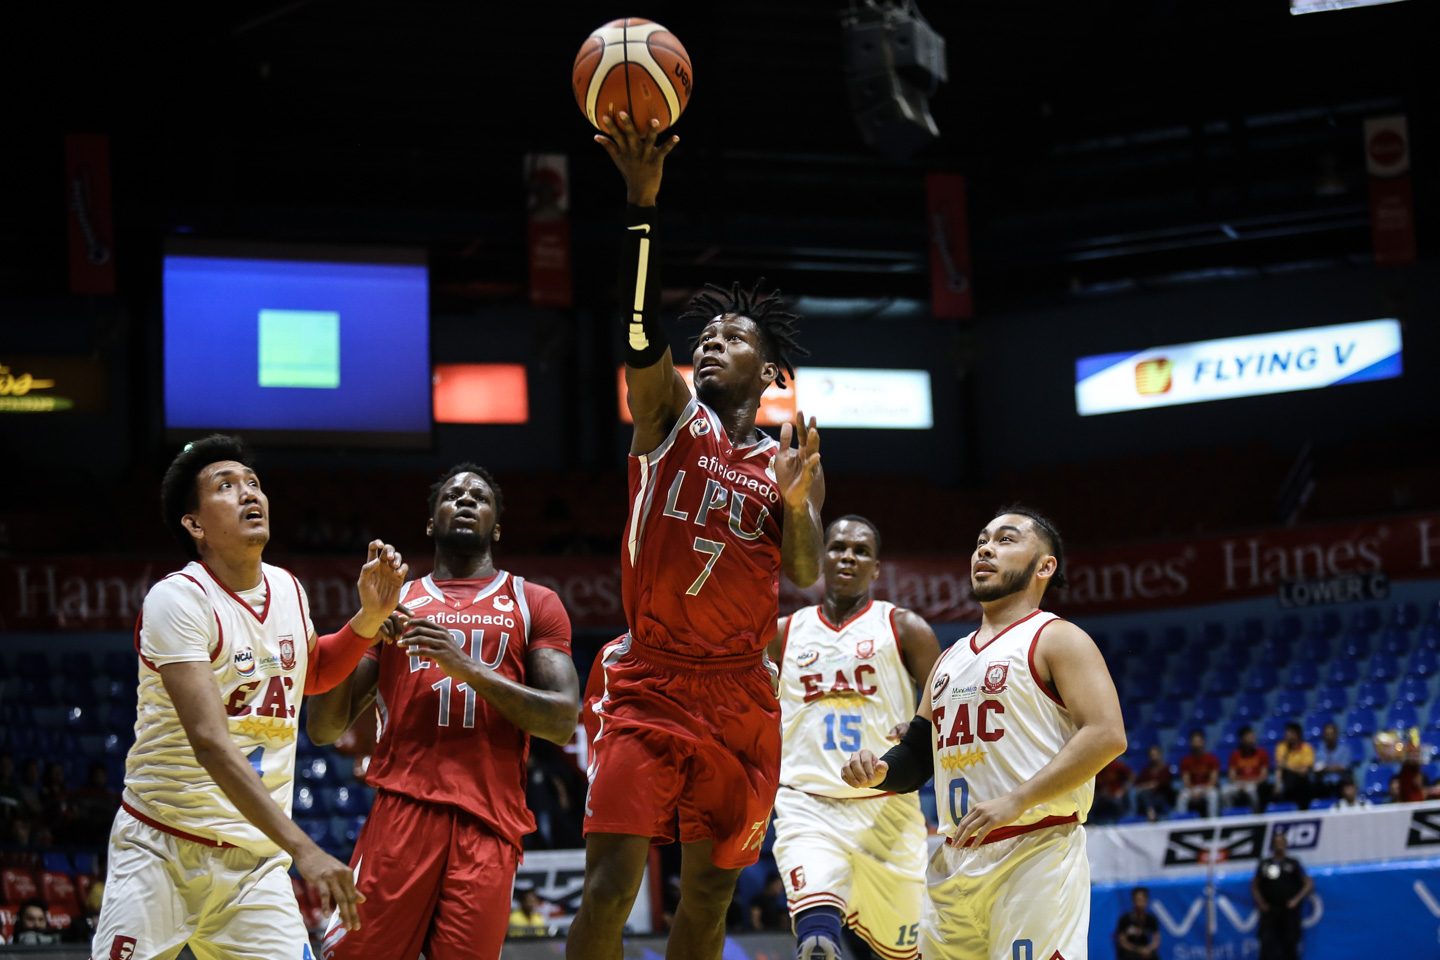 Pirates hold off Generals’ fightback for solo NCAA lead